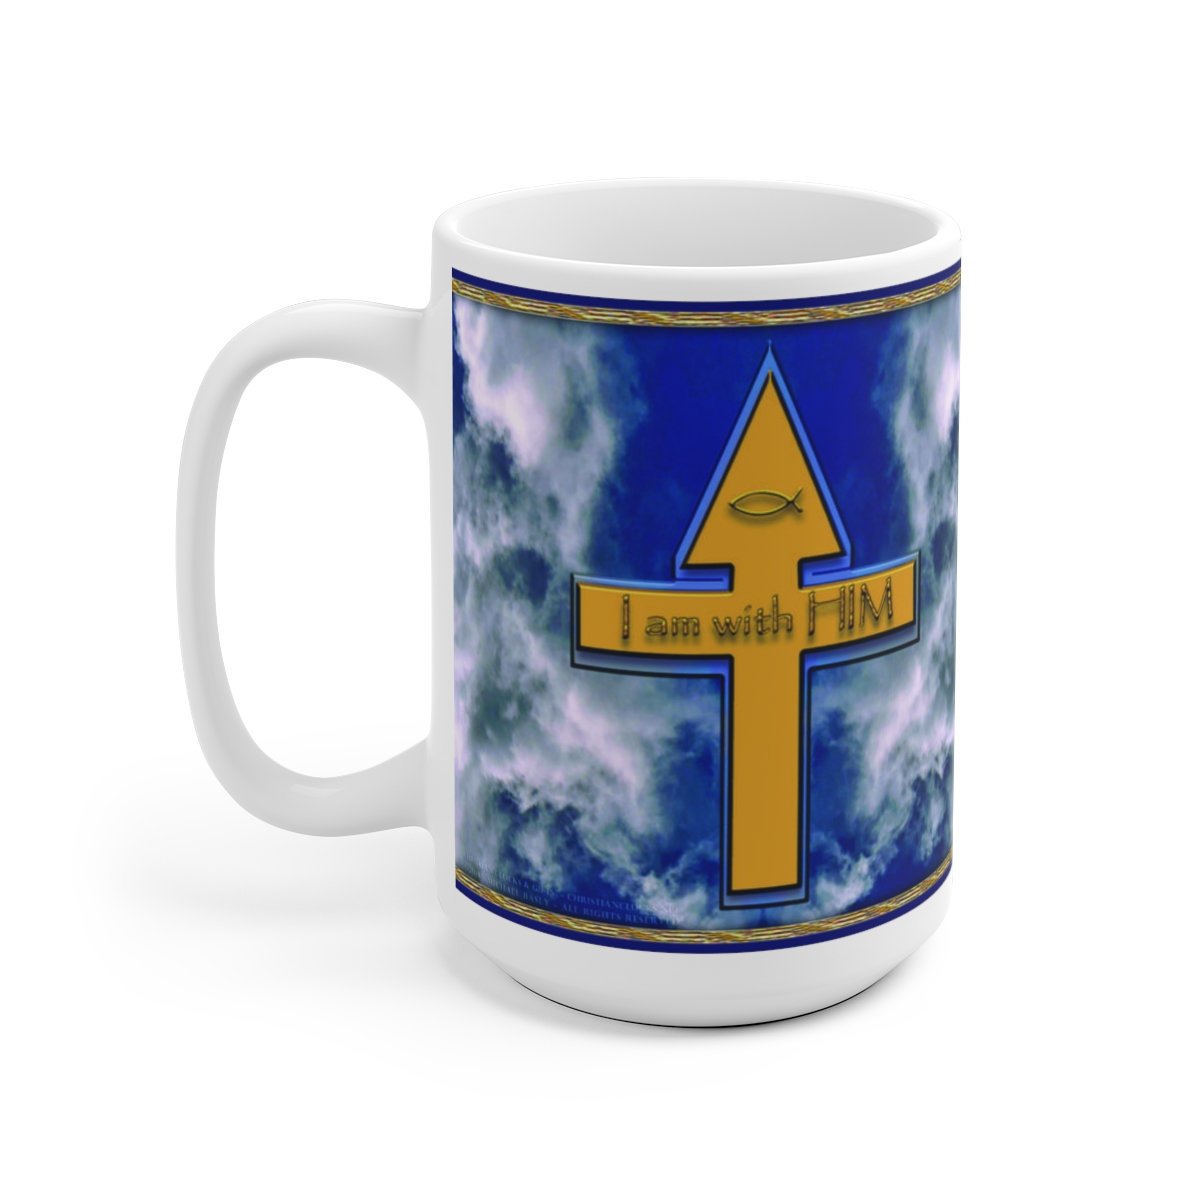 Religious 'I am with HIM' Full Image Mug 15oz. Printed in U.S.A. Art By S.Michael. Ceramic. Vibrant Colors. etsy.me/2XaN0dT #housewares #white #yes #ceramic #religious #mugs #mug #15ozmug #religiousmug